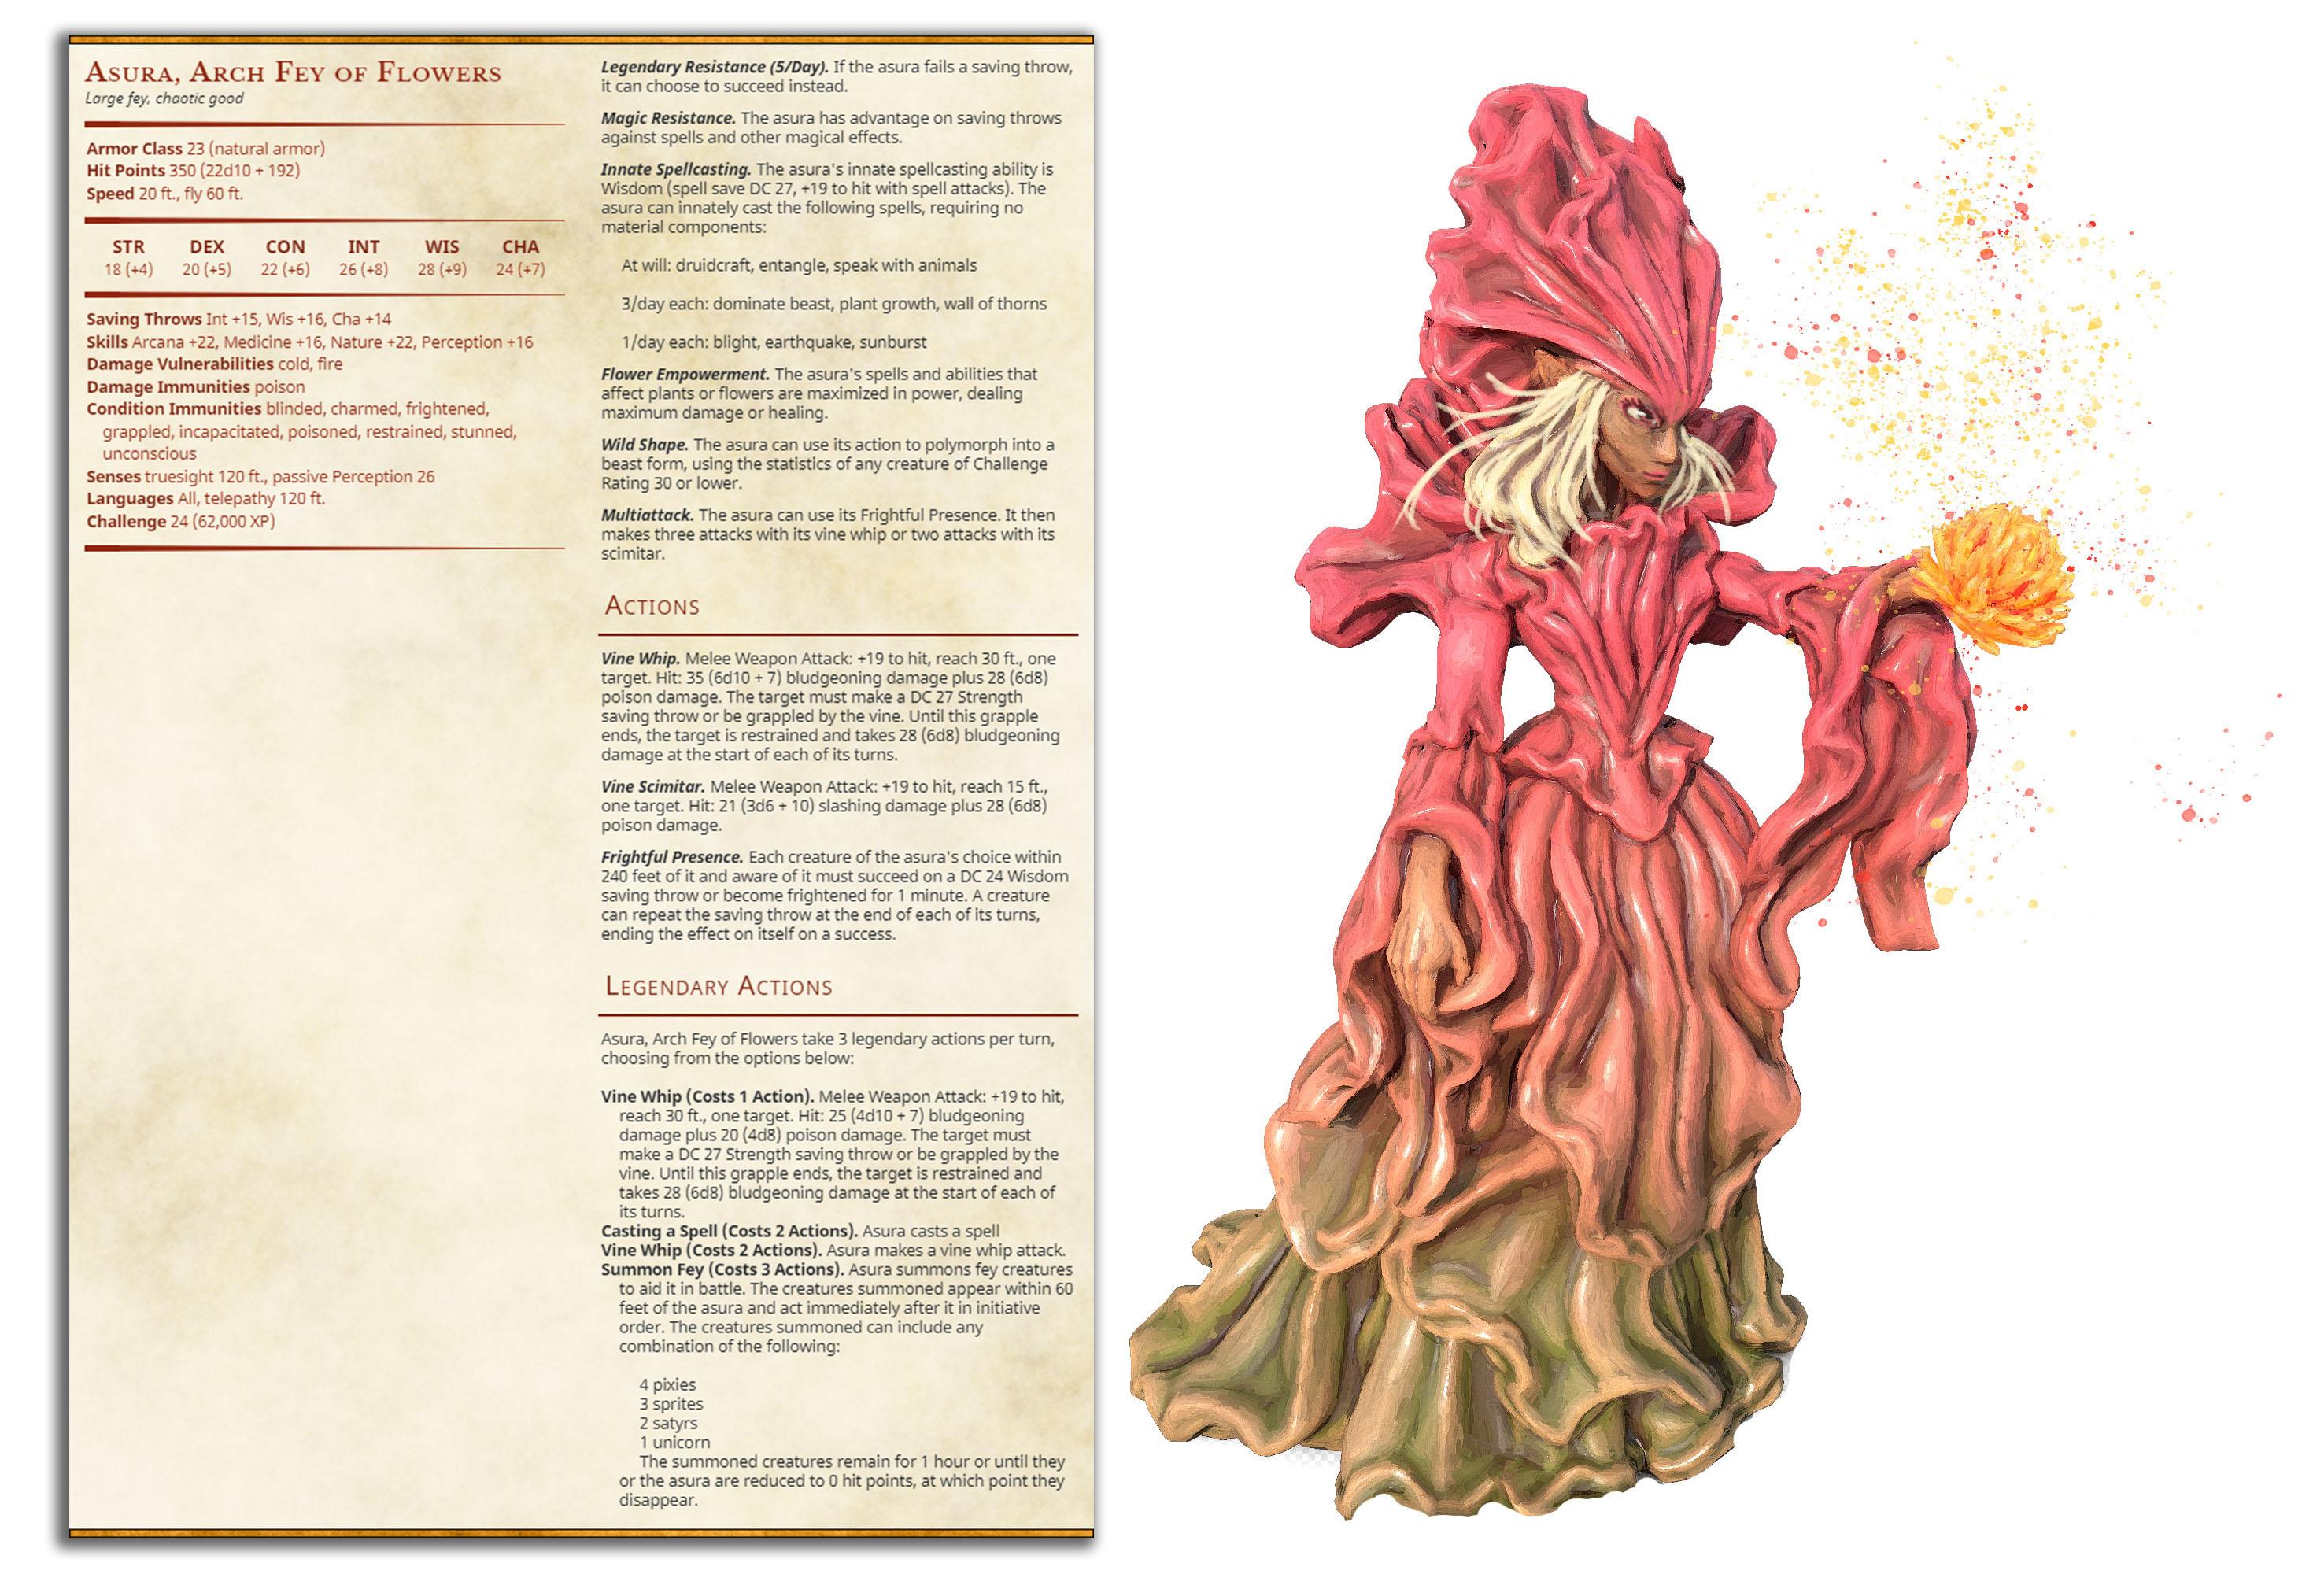 Arch Fey of the Blossom - Not The Bees - PRESUPPORTED - Illustrated and Stats - 32mm scale			 3d model